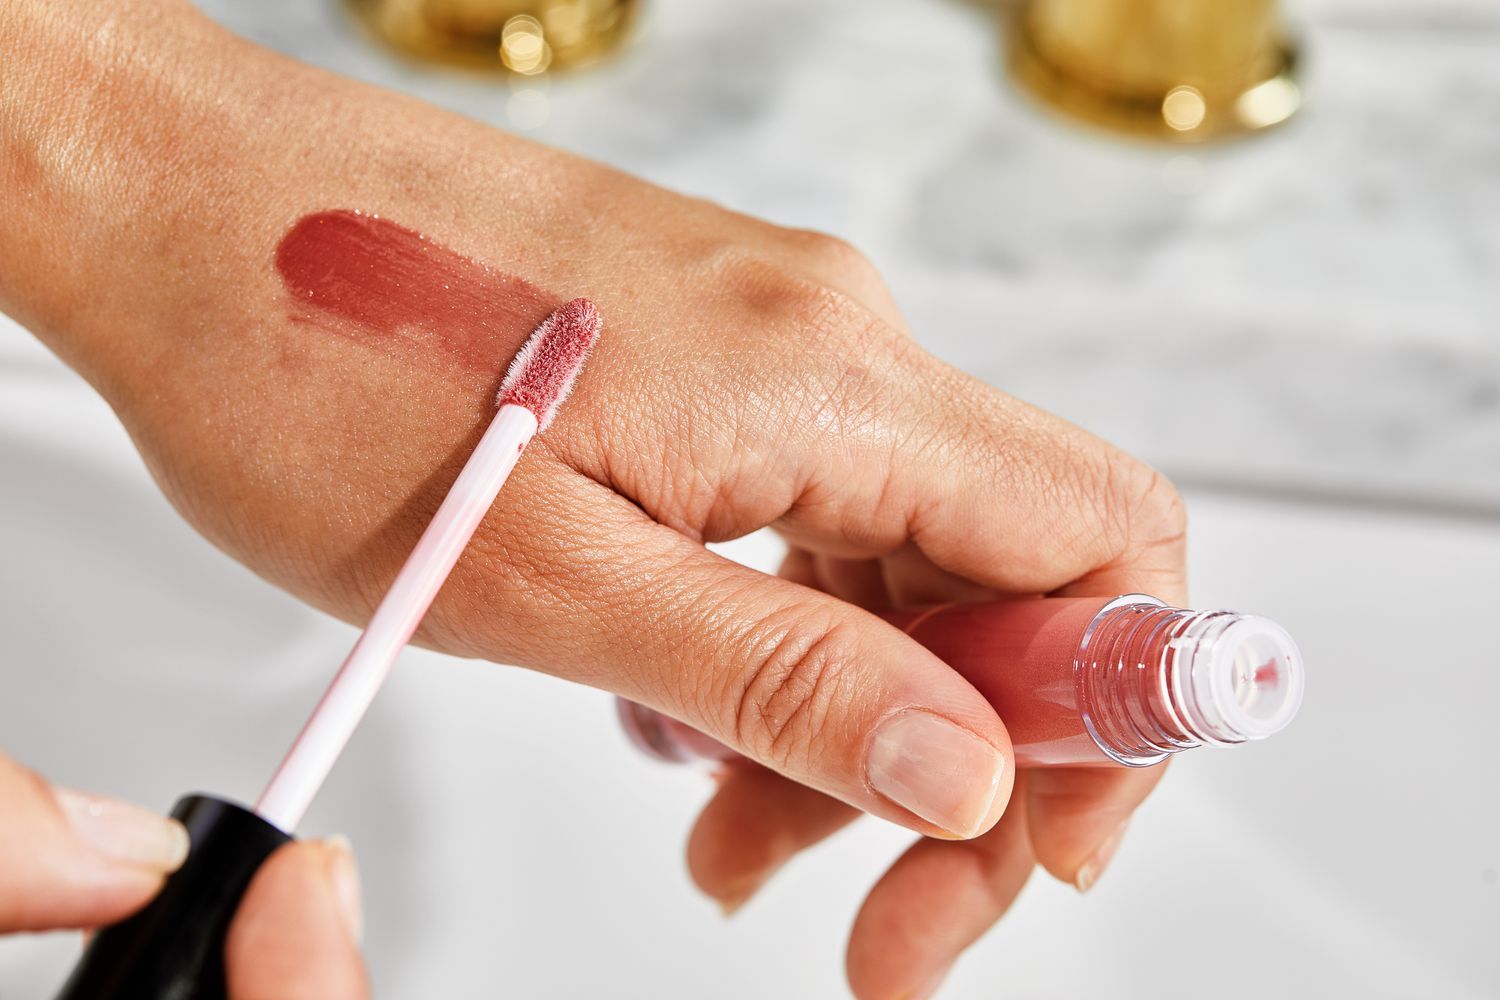 Close up of a person applying Pat McGrath LUST Gloss to the back of their hand